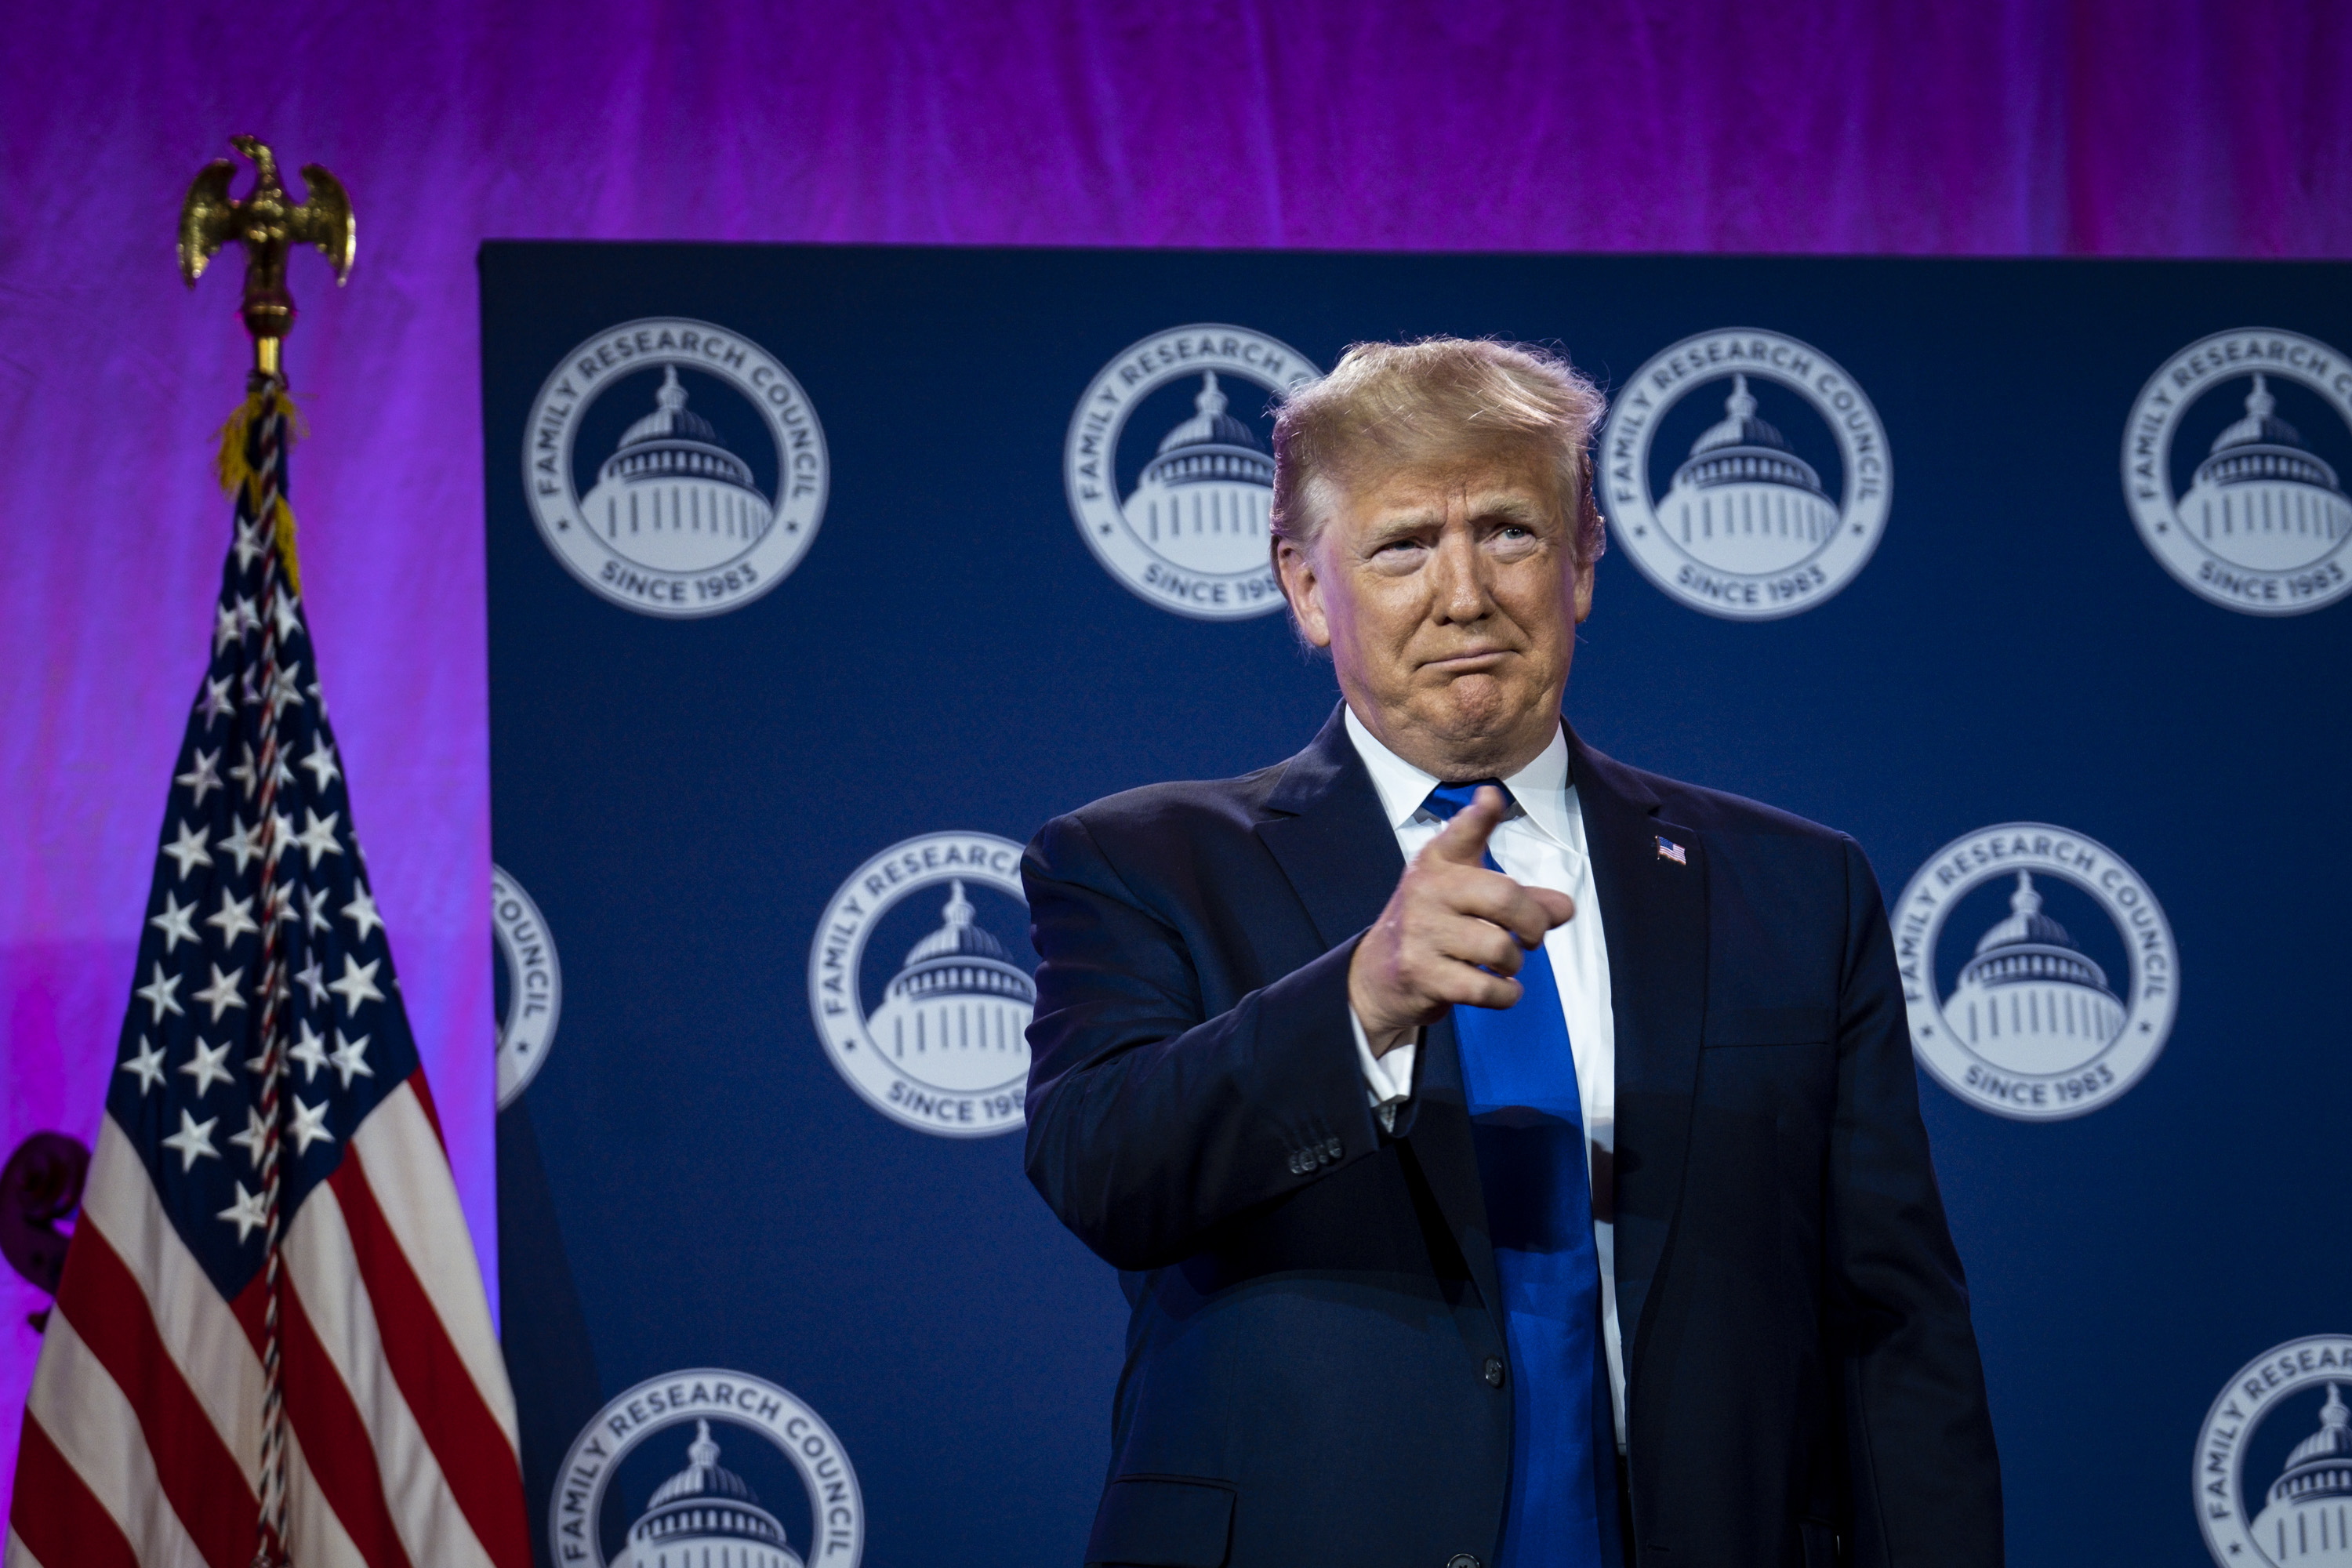 epa07916401 US President Donald J. Trump delivers remarks at Values Voter Summit at the Omni Shoreham Hotel in Washington, DC, USA, 12 October 2019. The appearance at the Summit comes as evangelical leaders this week criticized Trump's decision to stand down US forces in northern Syria.  EPA/PETE MAROVICH / POOL